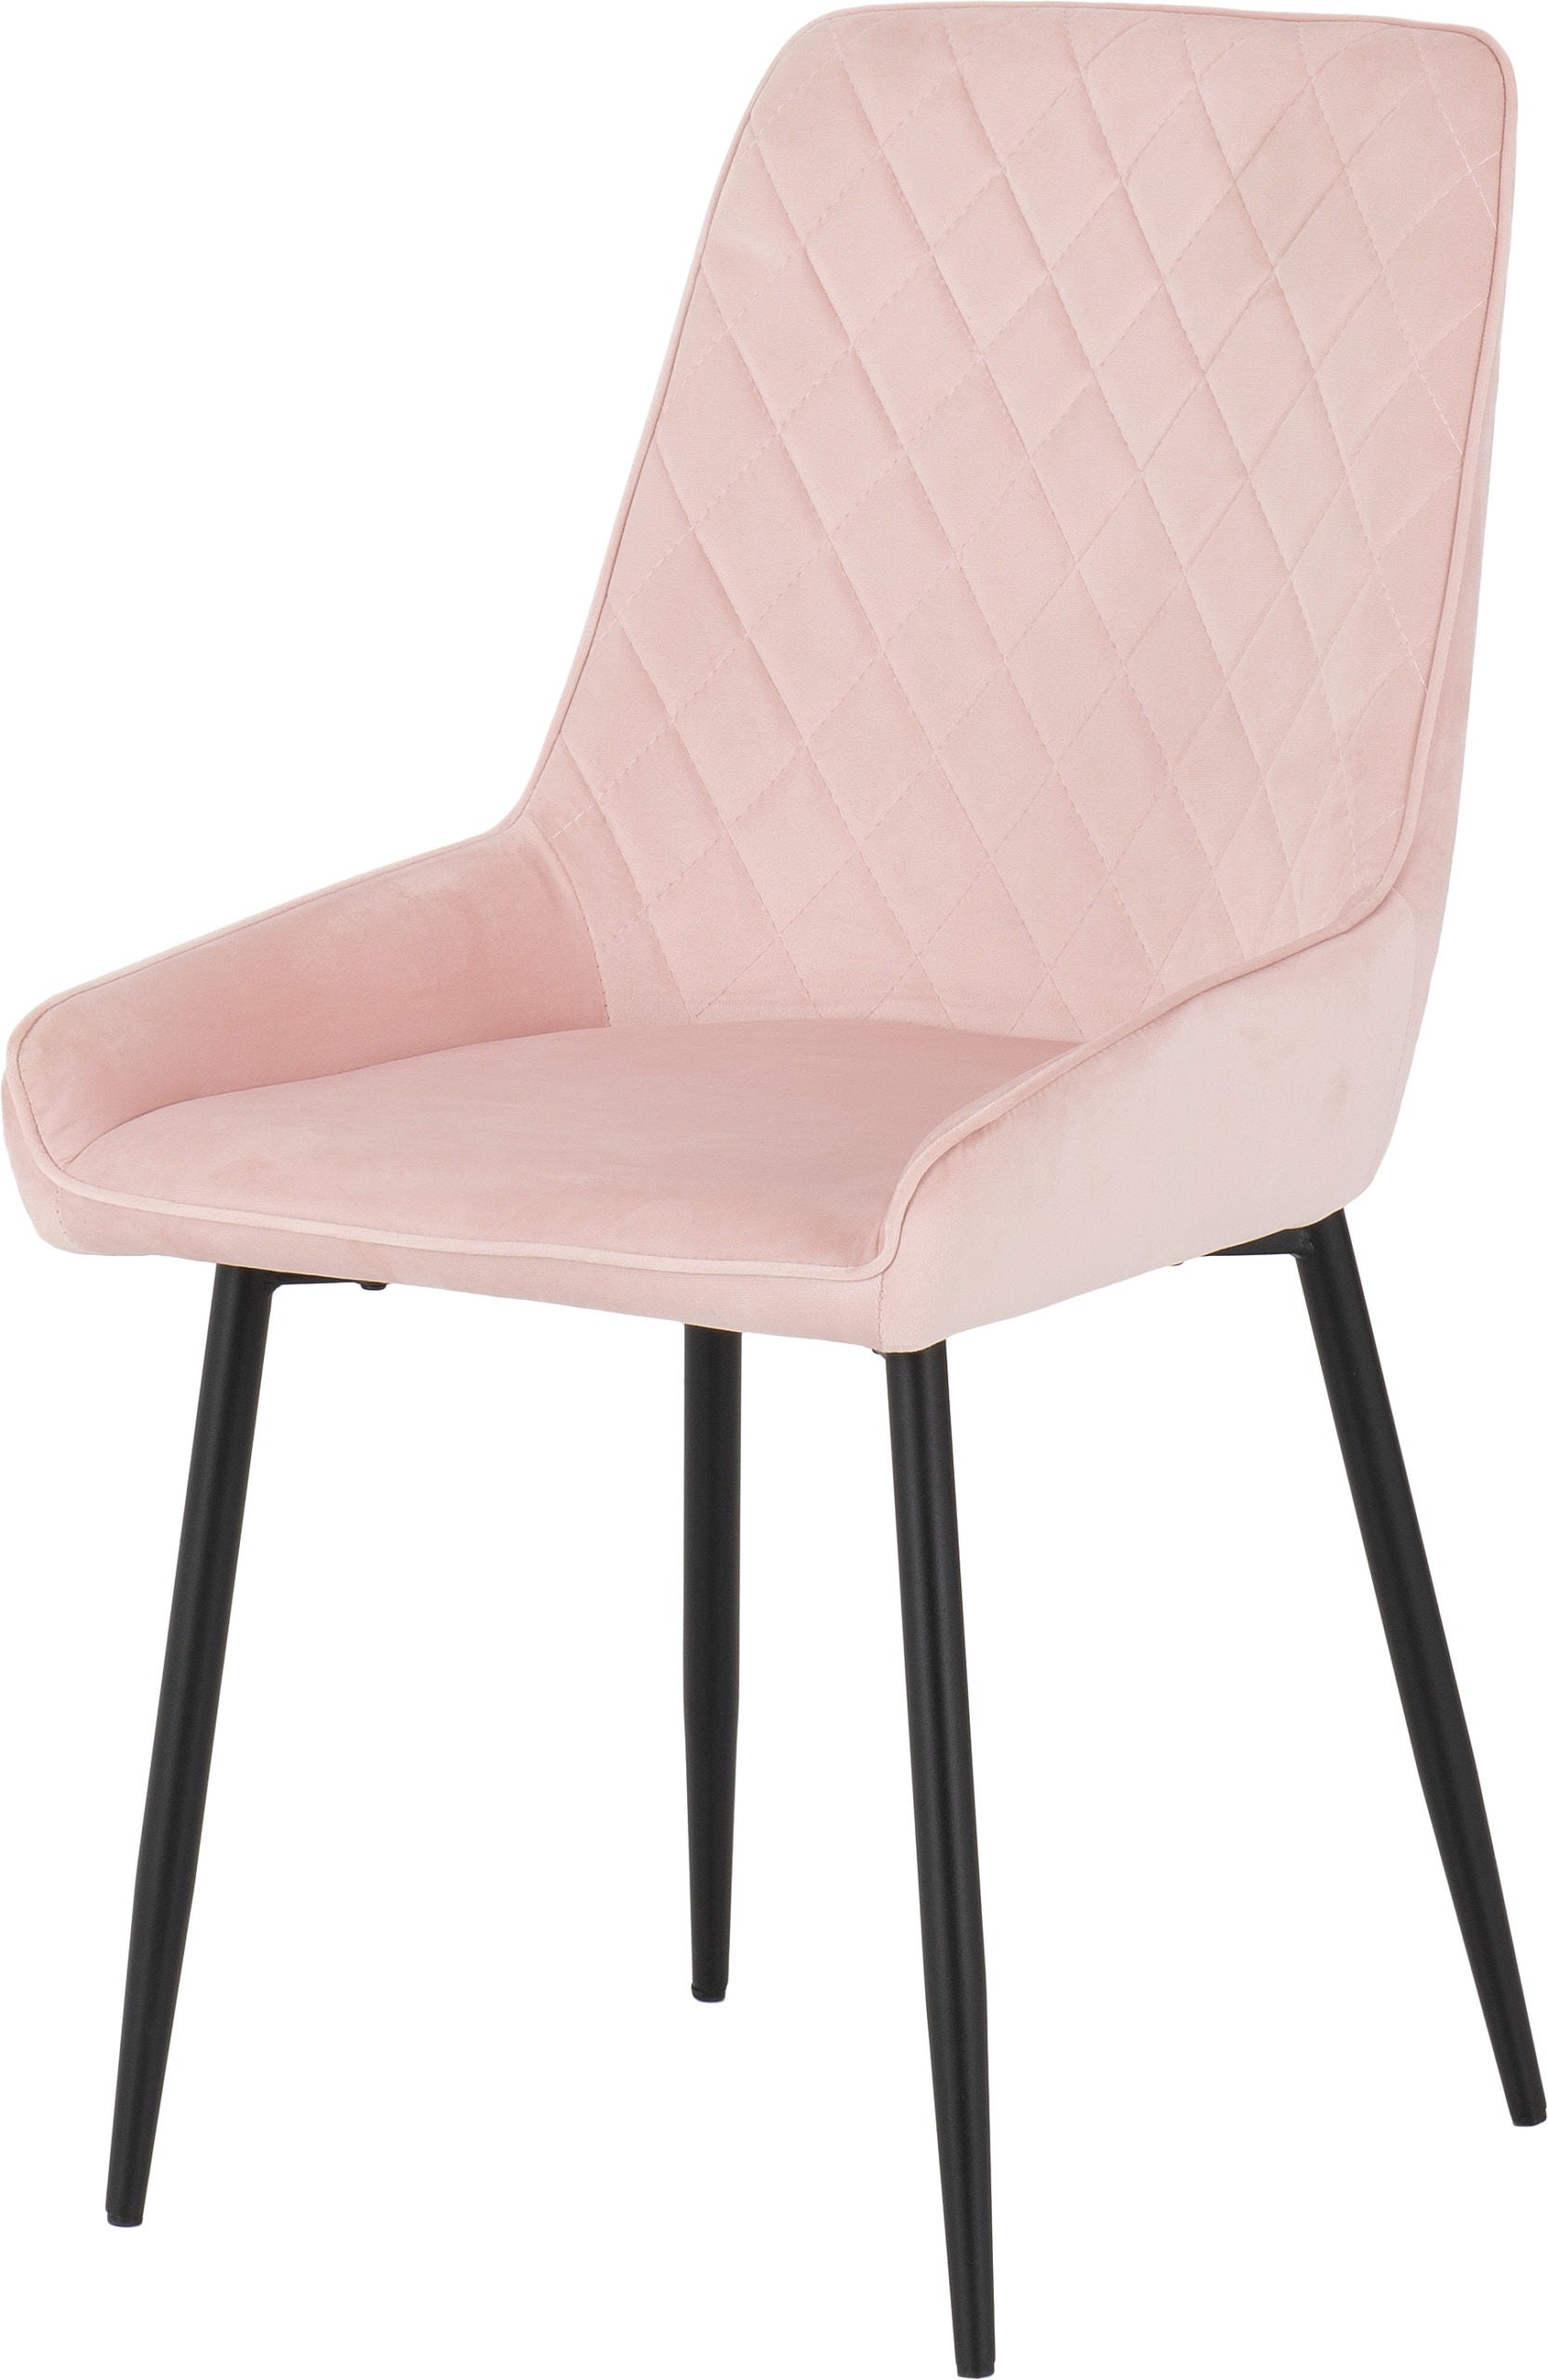 Avery Chair Baby Pink Velvet - The Right Buy Store